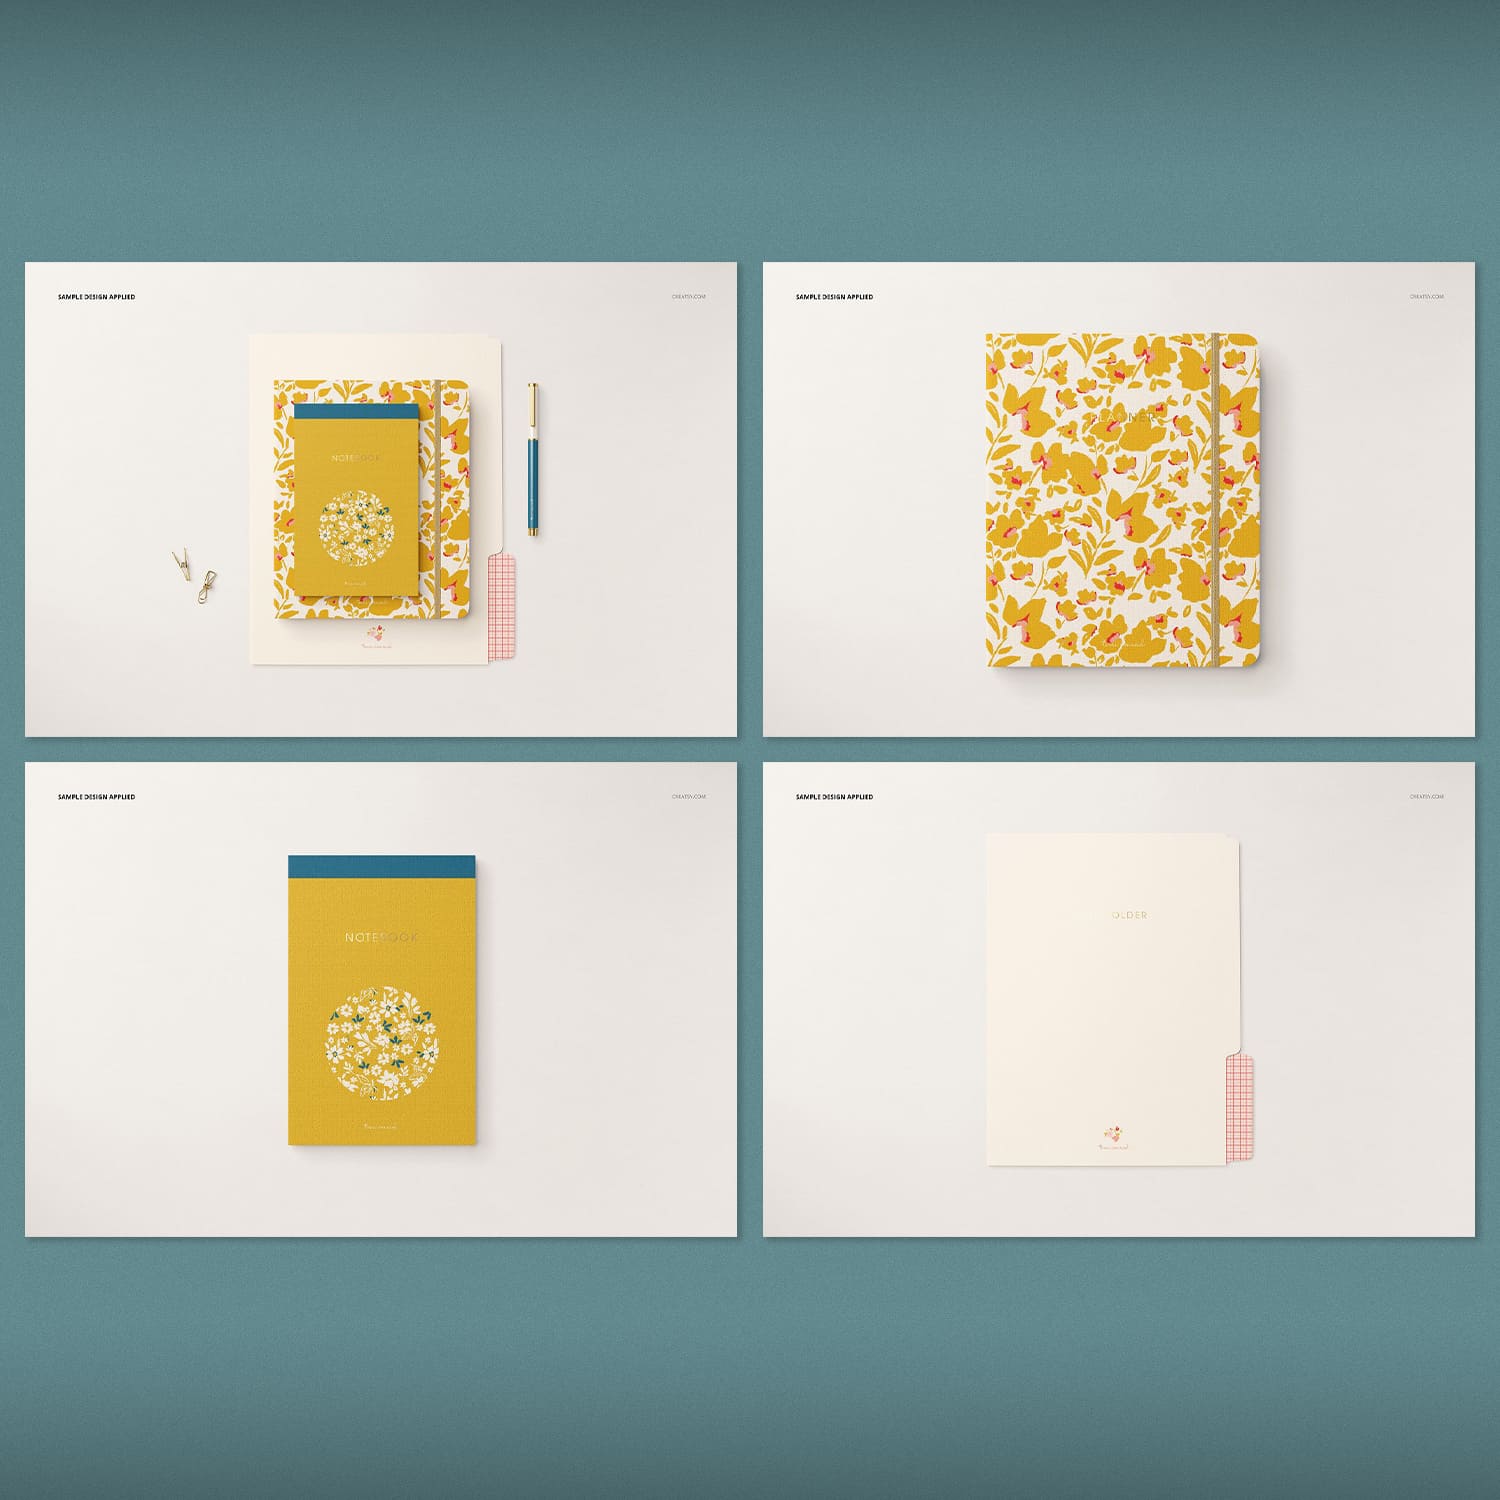 A set of stationery images with great designs.